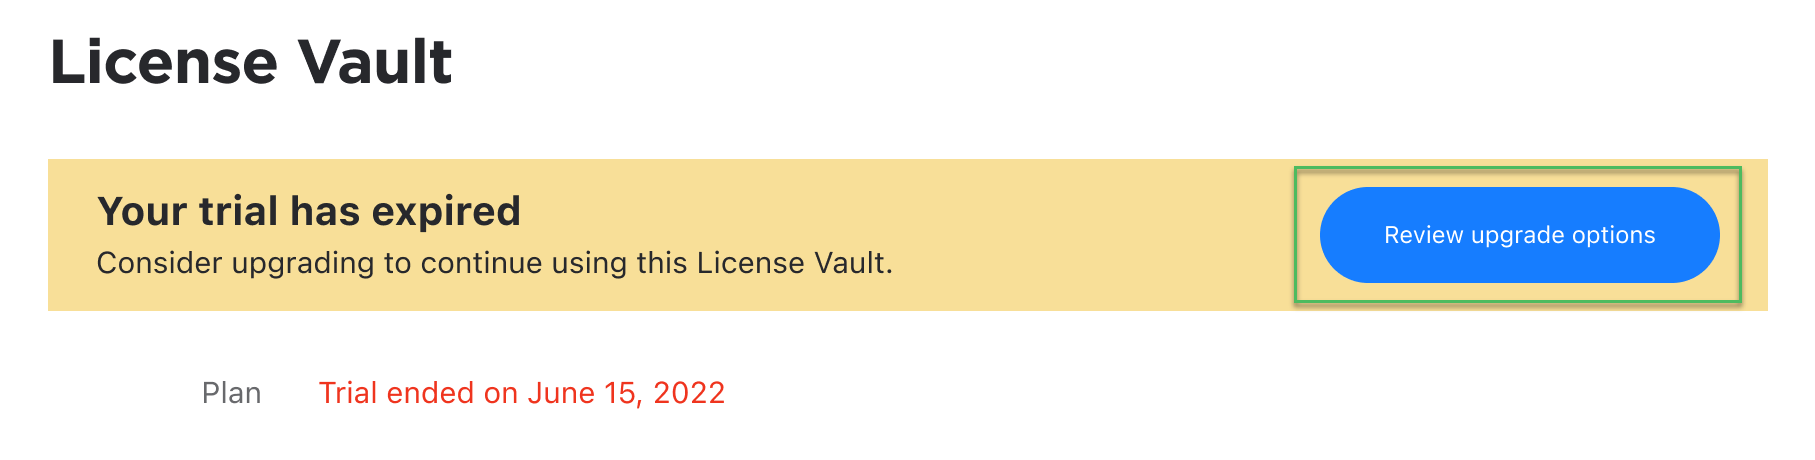 The button to review upgrade options on the License Vault settings page after the of the trial period